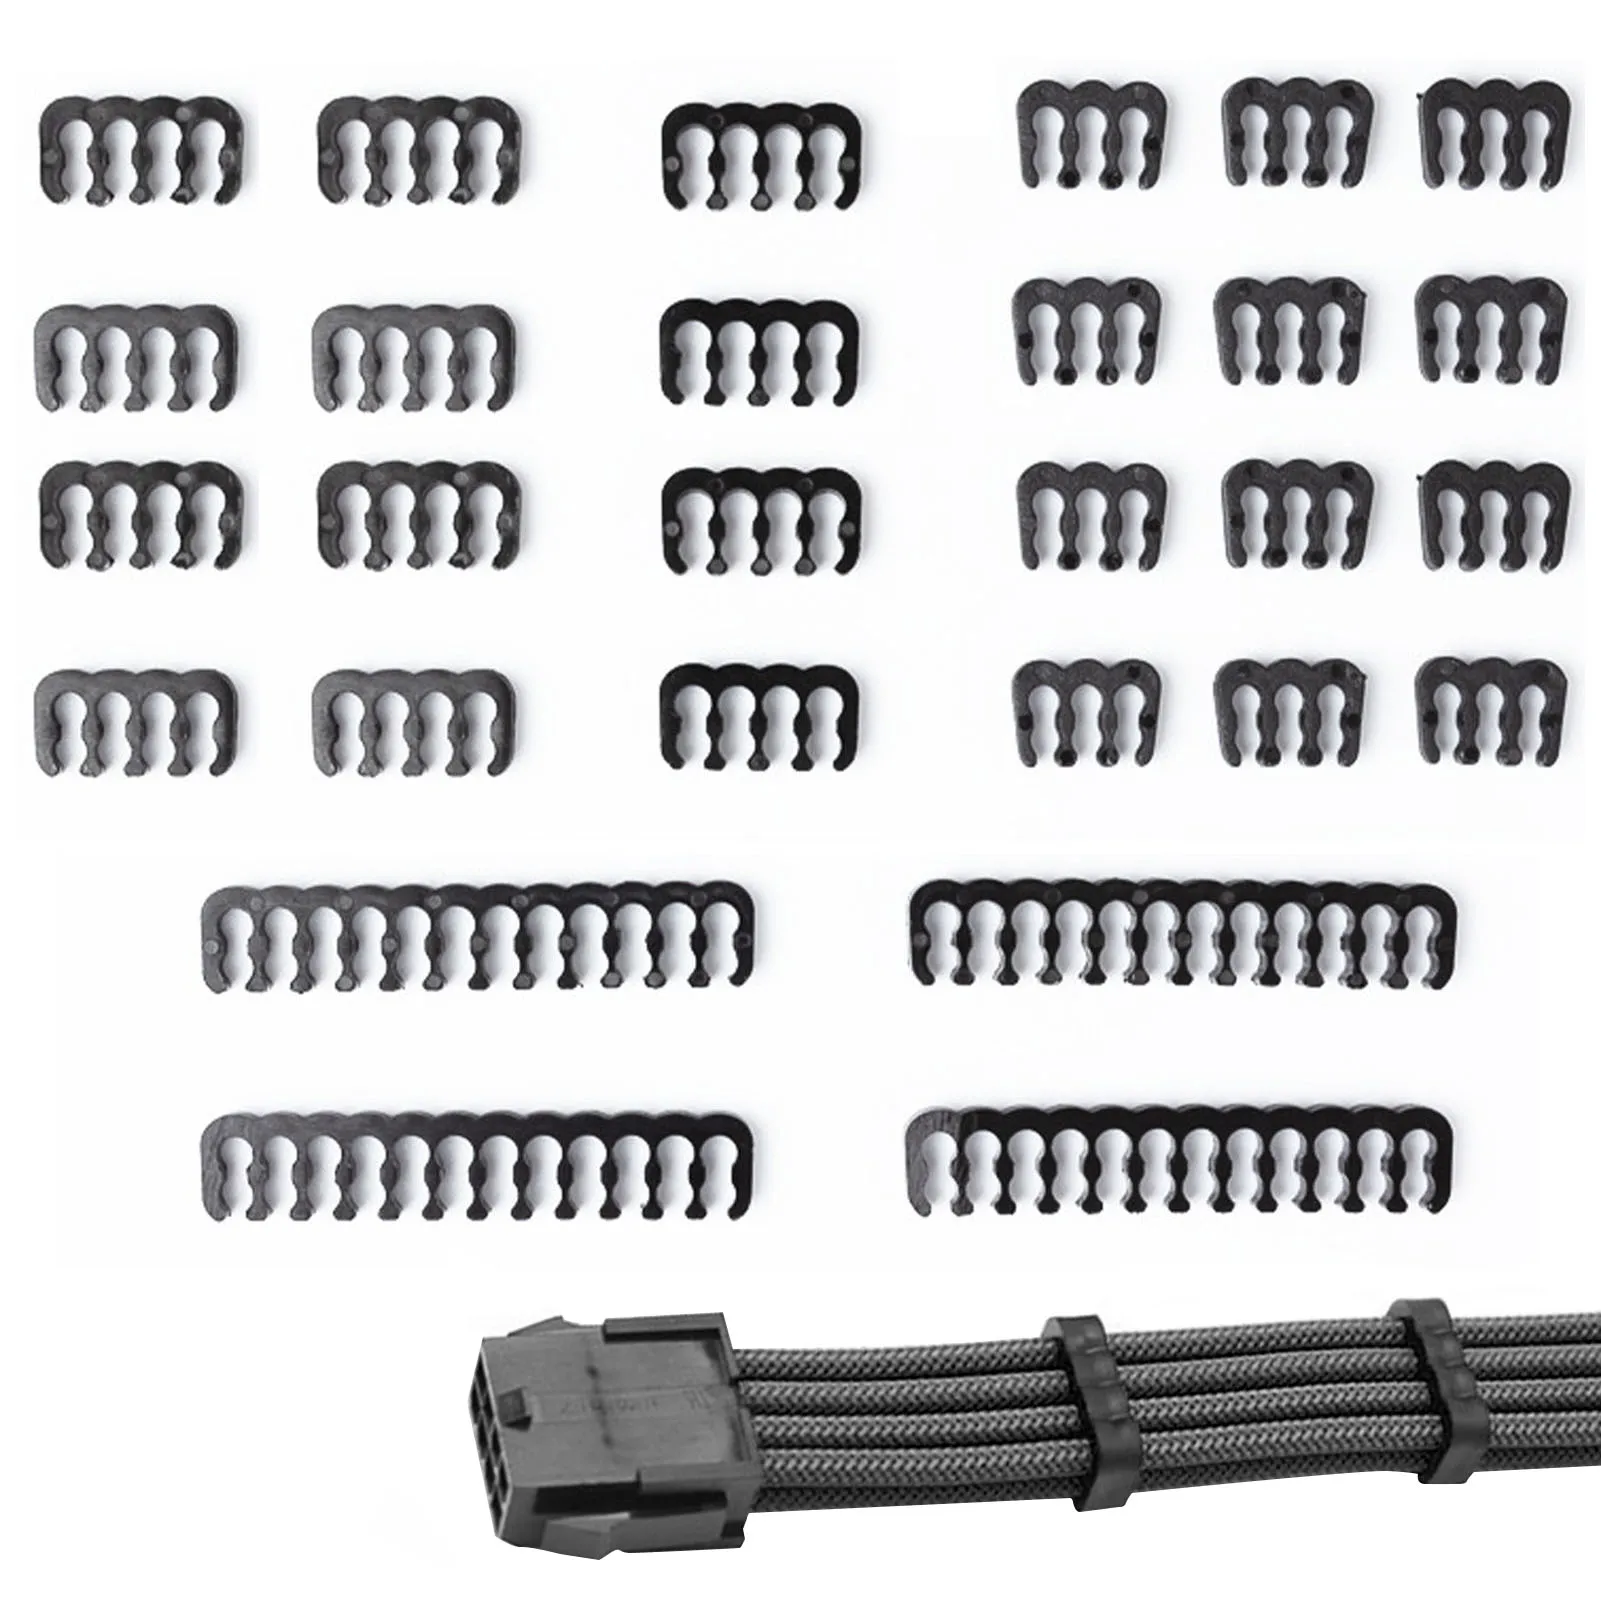 PC Cable Comb 24 Pieces Set Cable Comb For Organizing 3.0 To 3.6 Mm 6 Pin/8 Pin/24 Pin PSU Extension Cable PC Cable Comb Clip